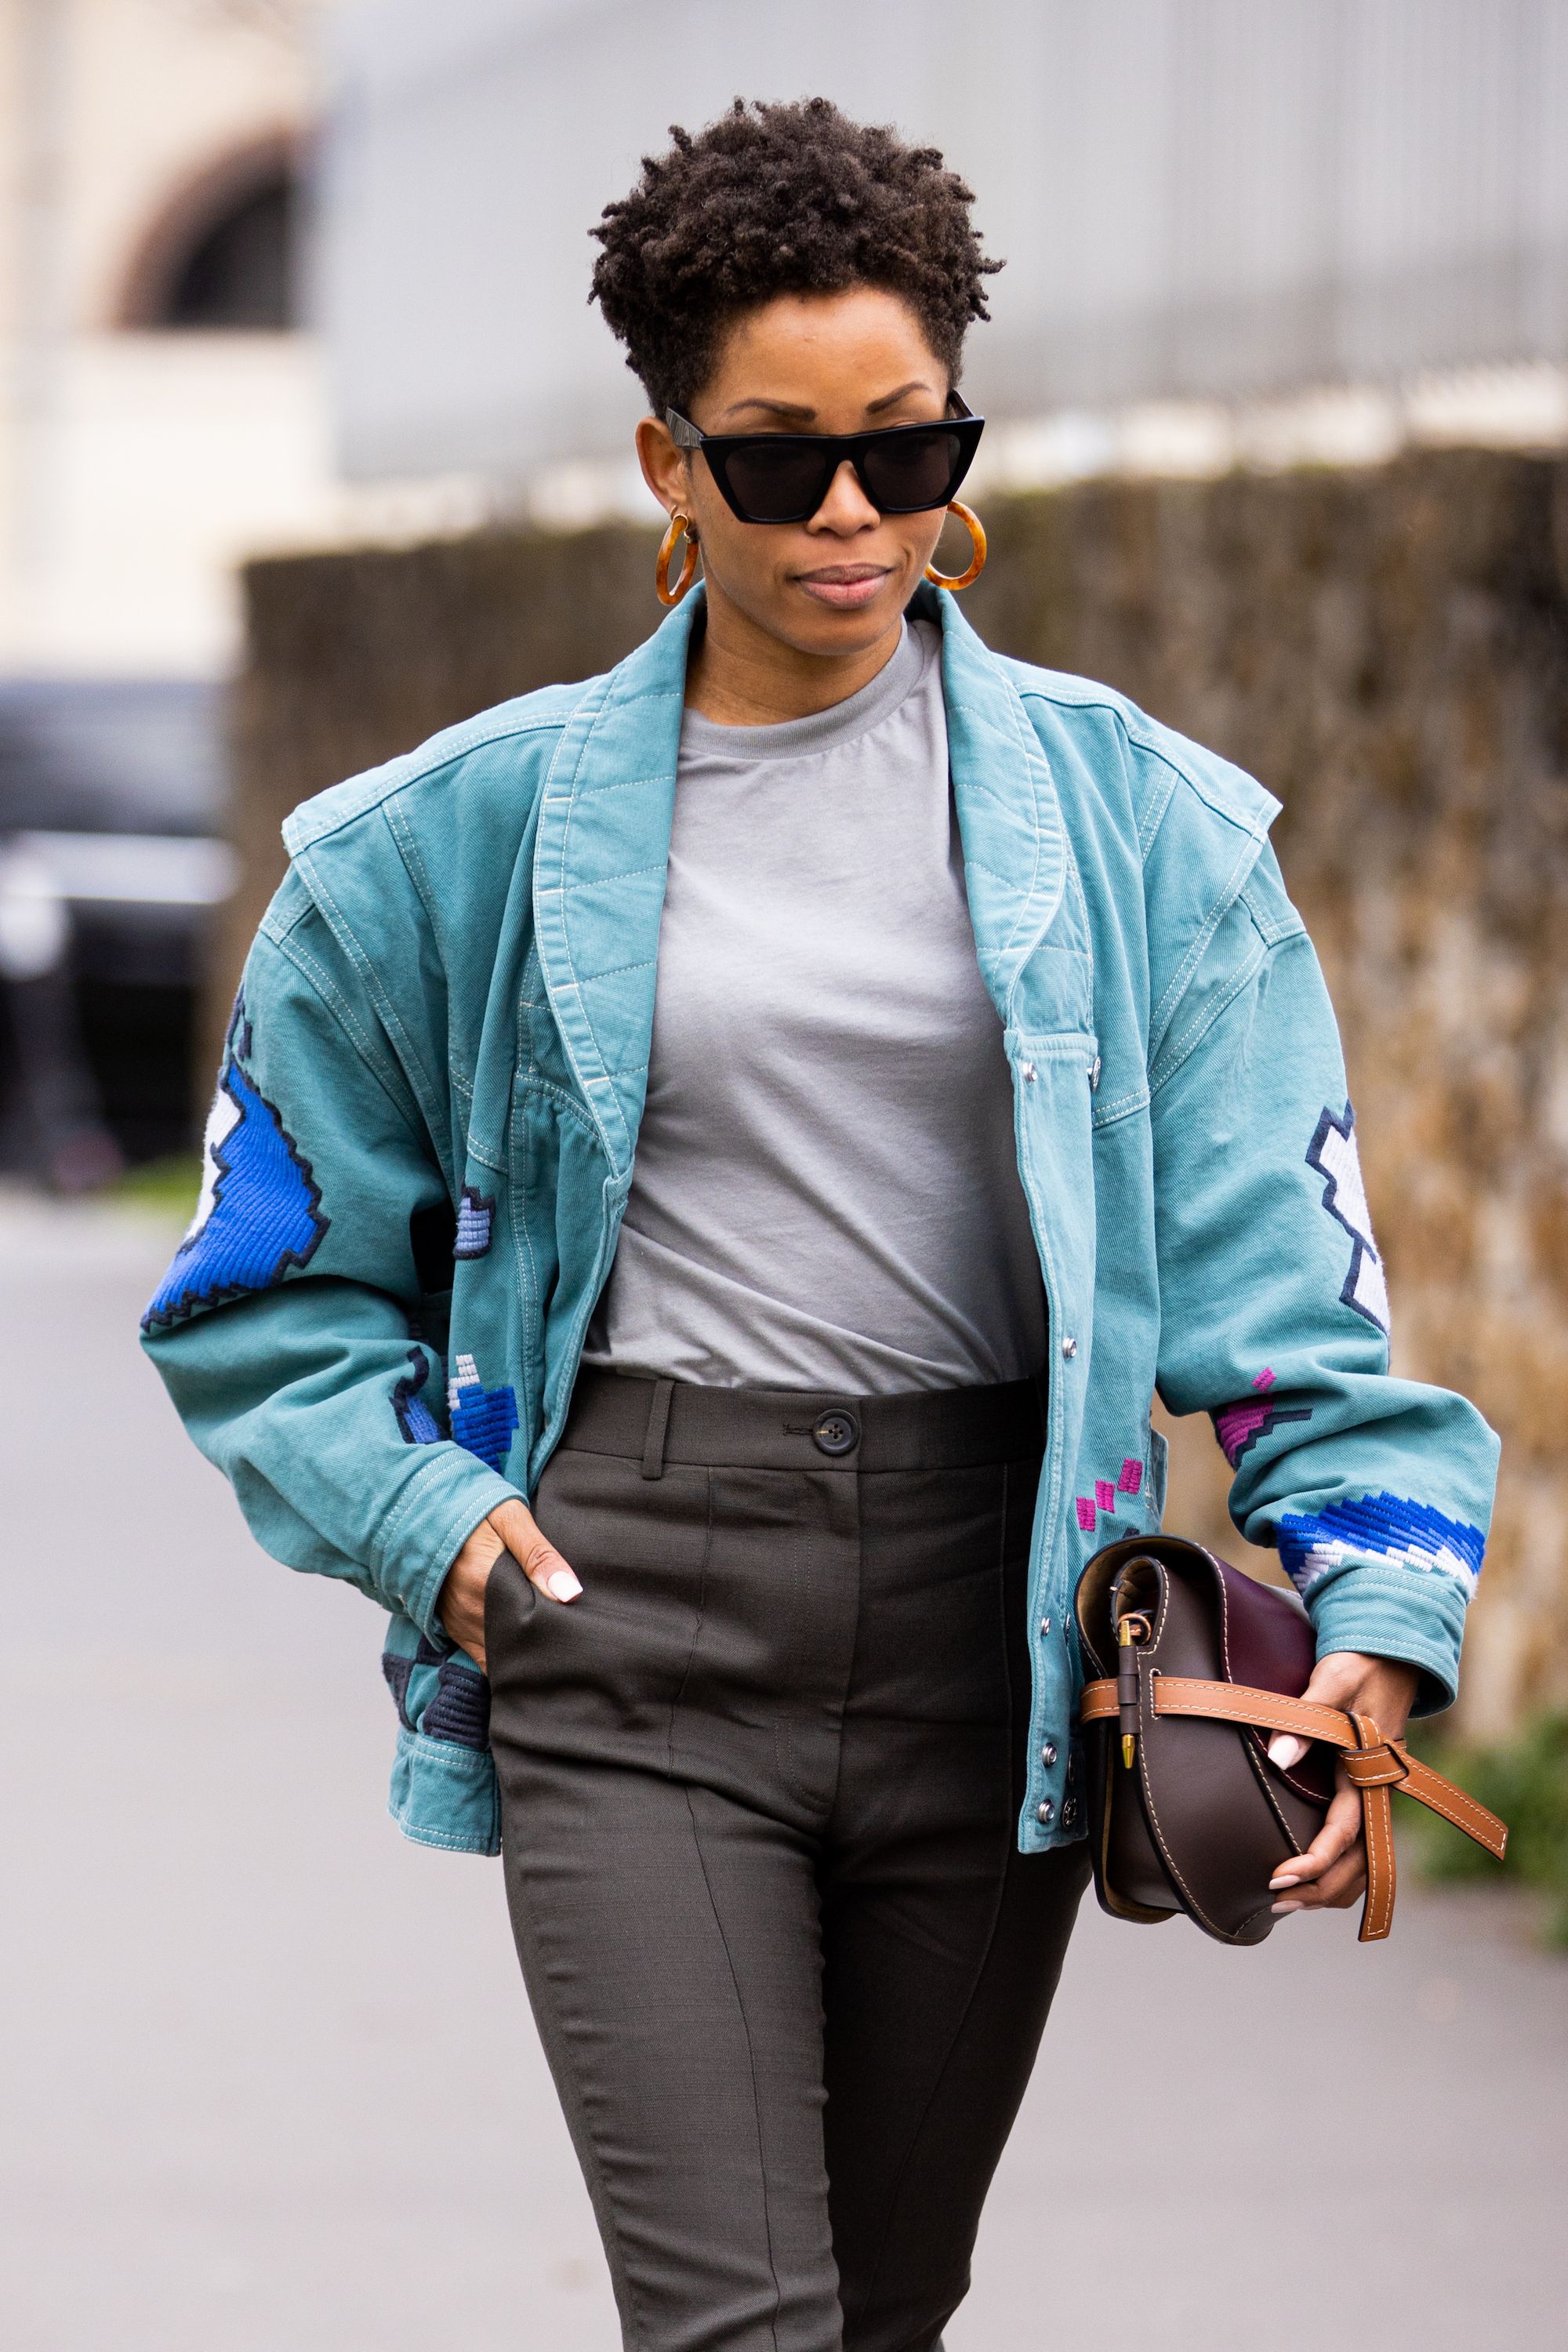 How to Style a Denim Jacket in the Winter - Somewhere, Lately